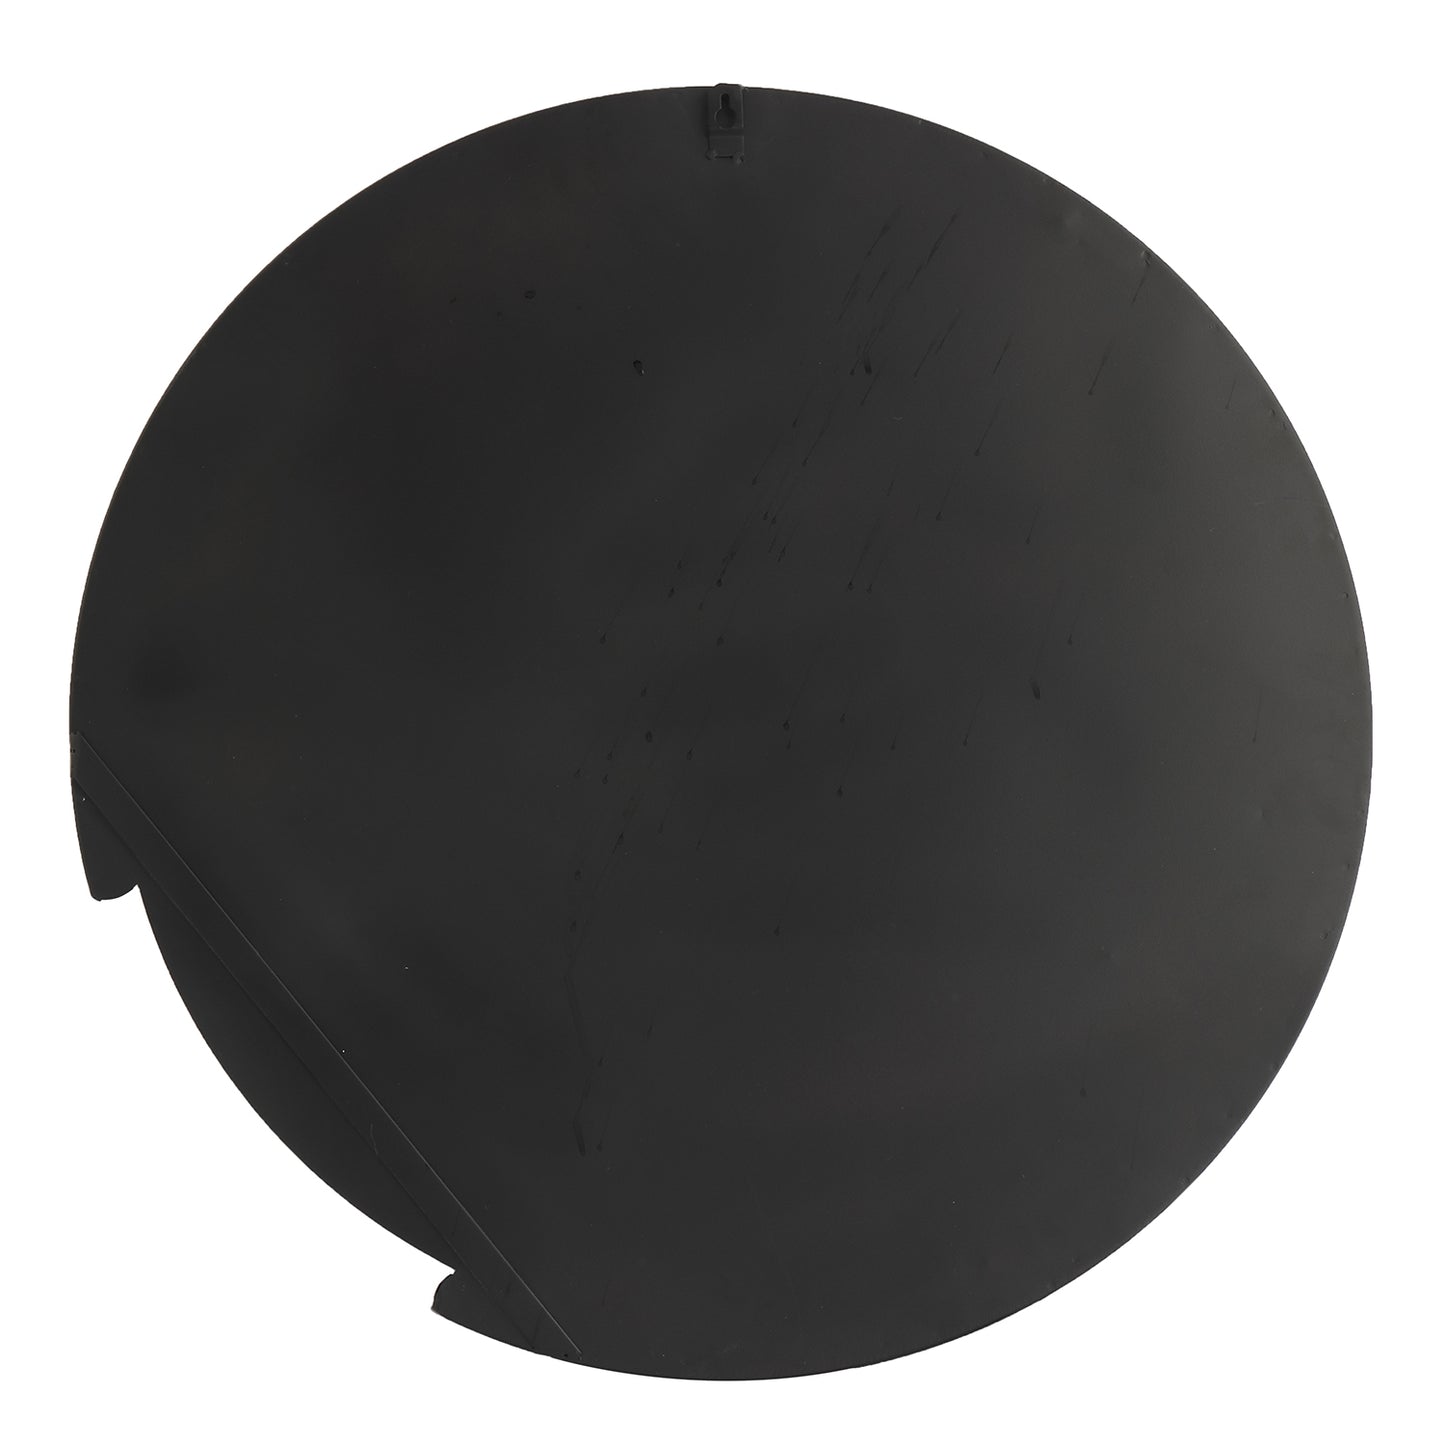 MacLuu Antique Black Round Industrial Wall Mirror with Scalloped Edge